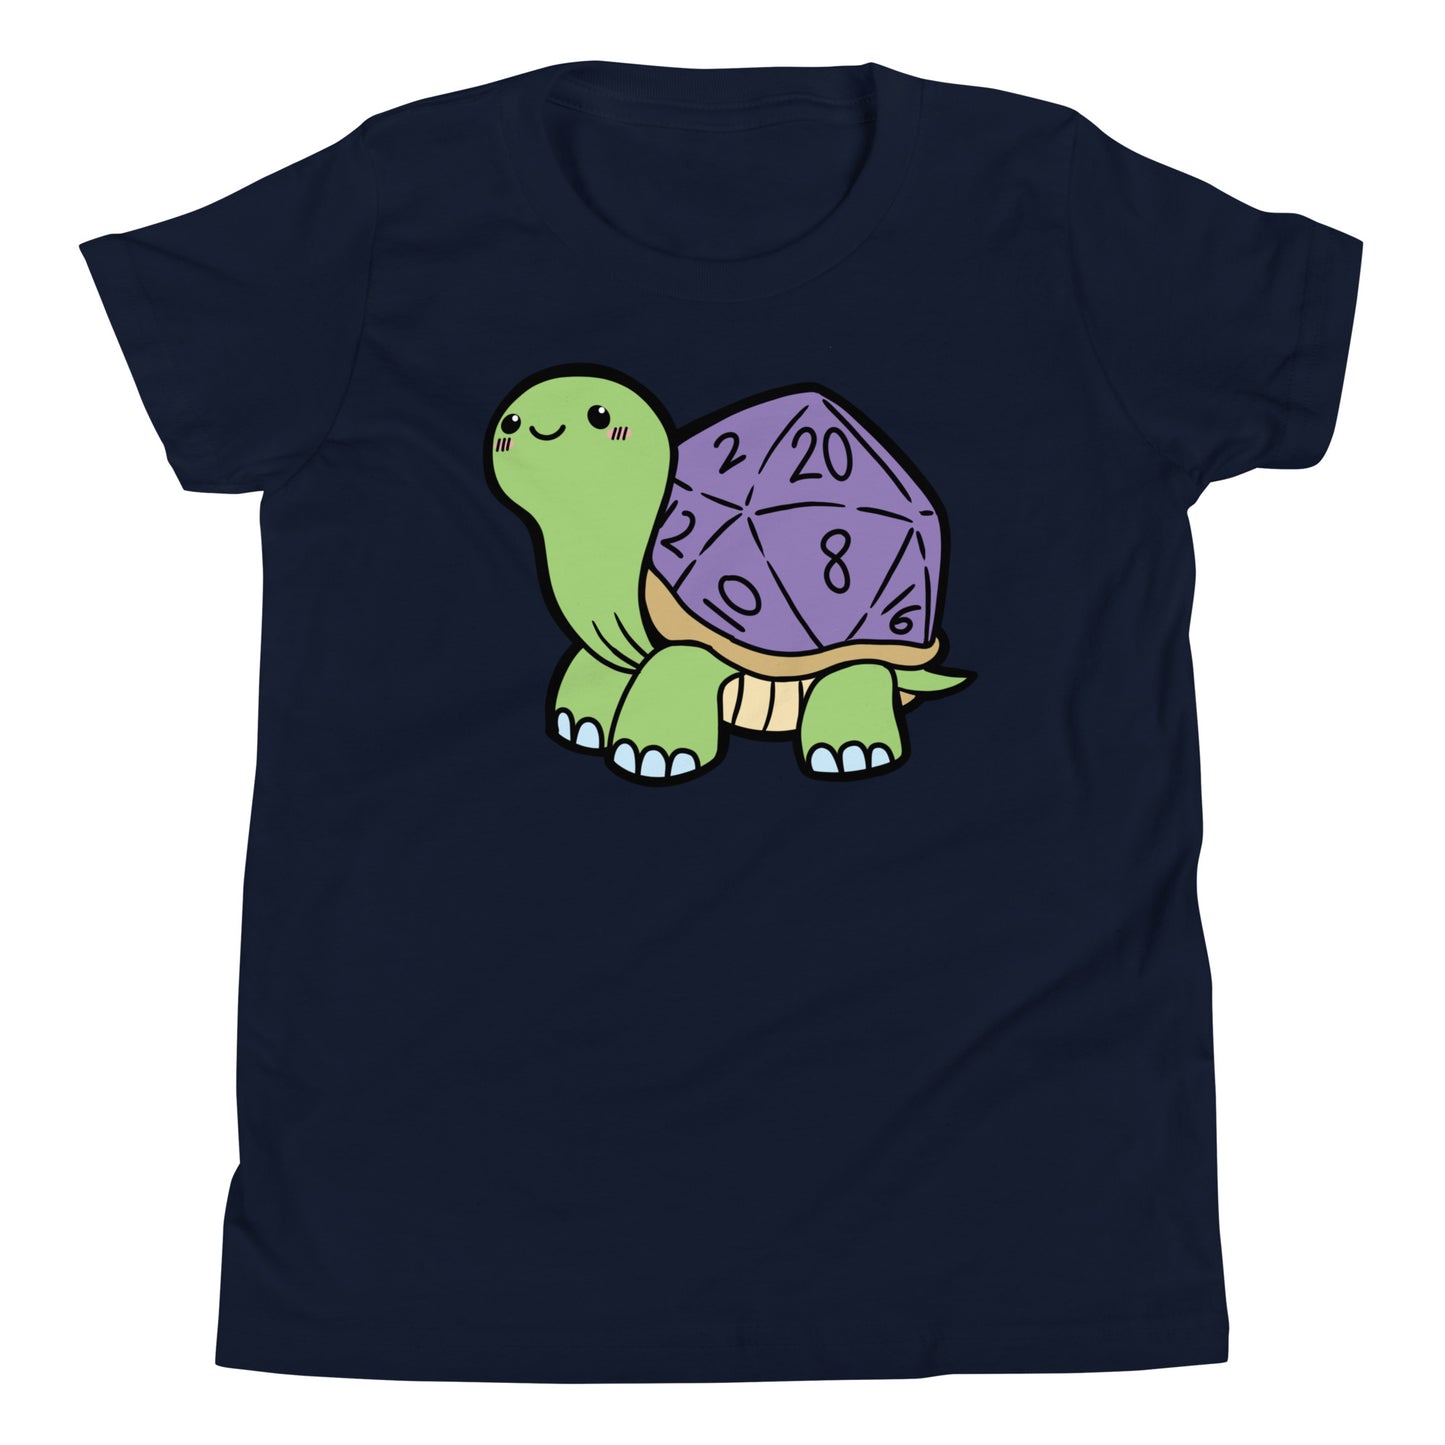 D20 Dice Turtle Youth Short Sleeve T-Shirt  Level 1 Gamers Navy S 